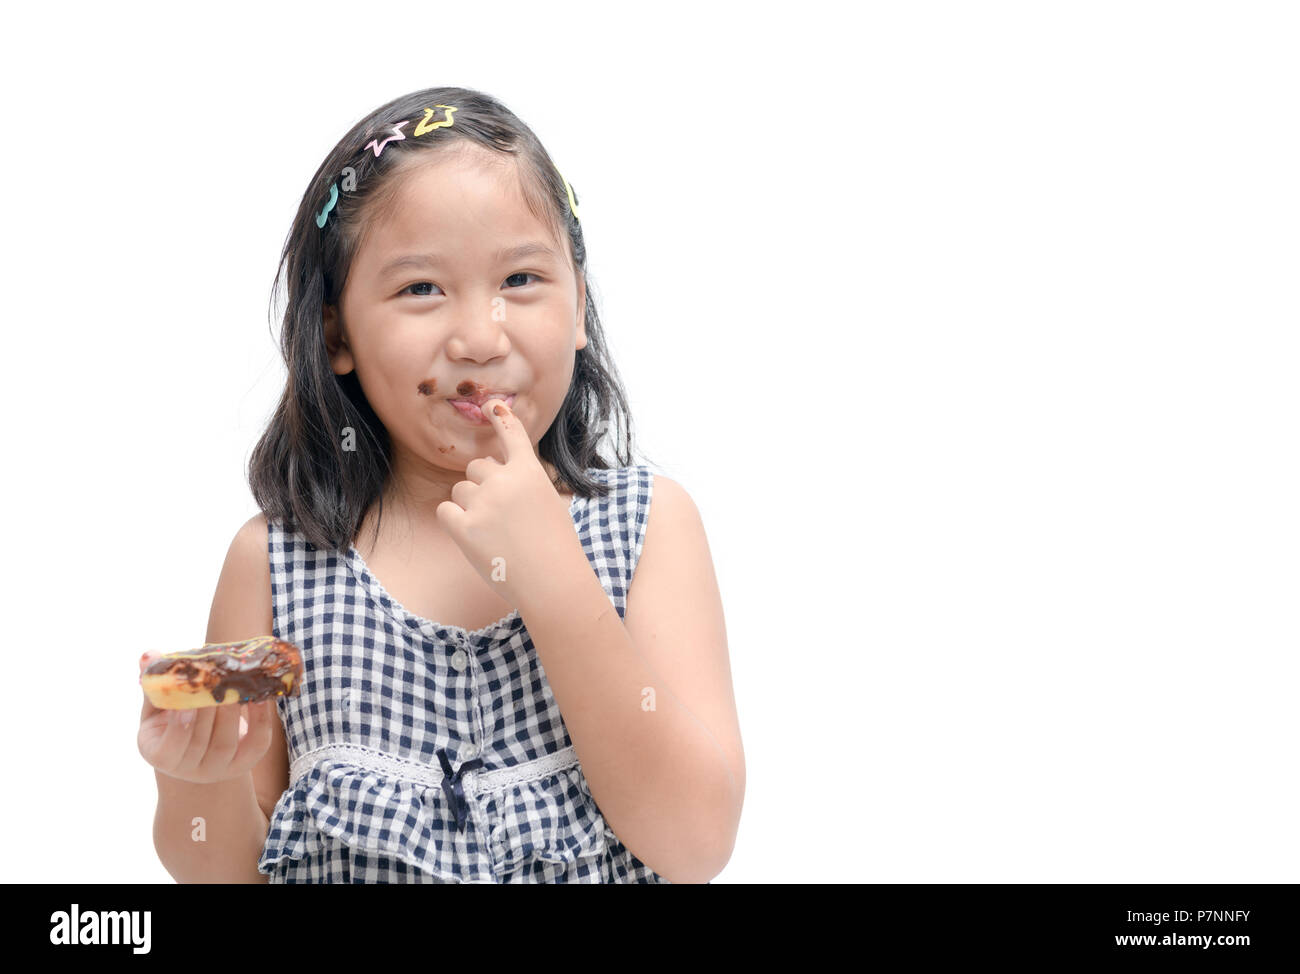 Little happy cute girl is eating donut isolated on white background. child is having fun with donut. Tasty food for kids. Funny time at home with swee Stock Photo